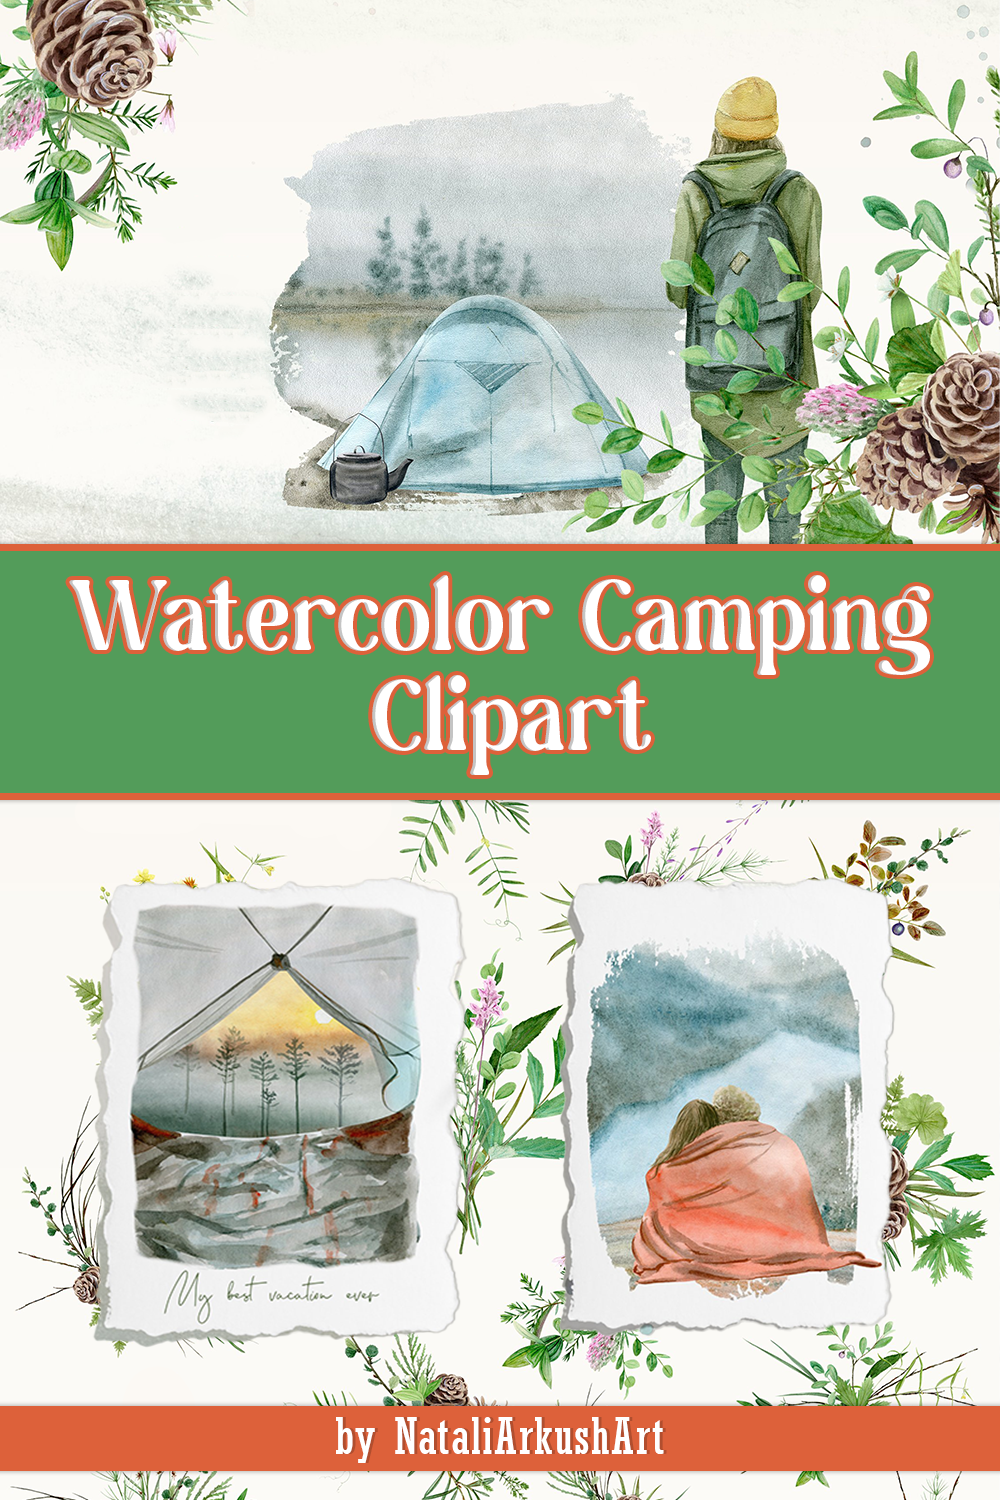 Watercolor camping clipart of pinterest.